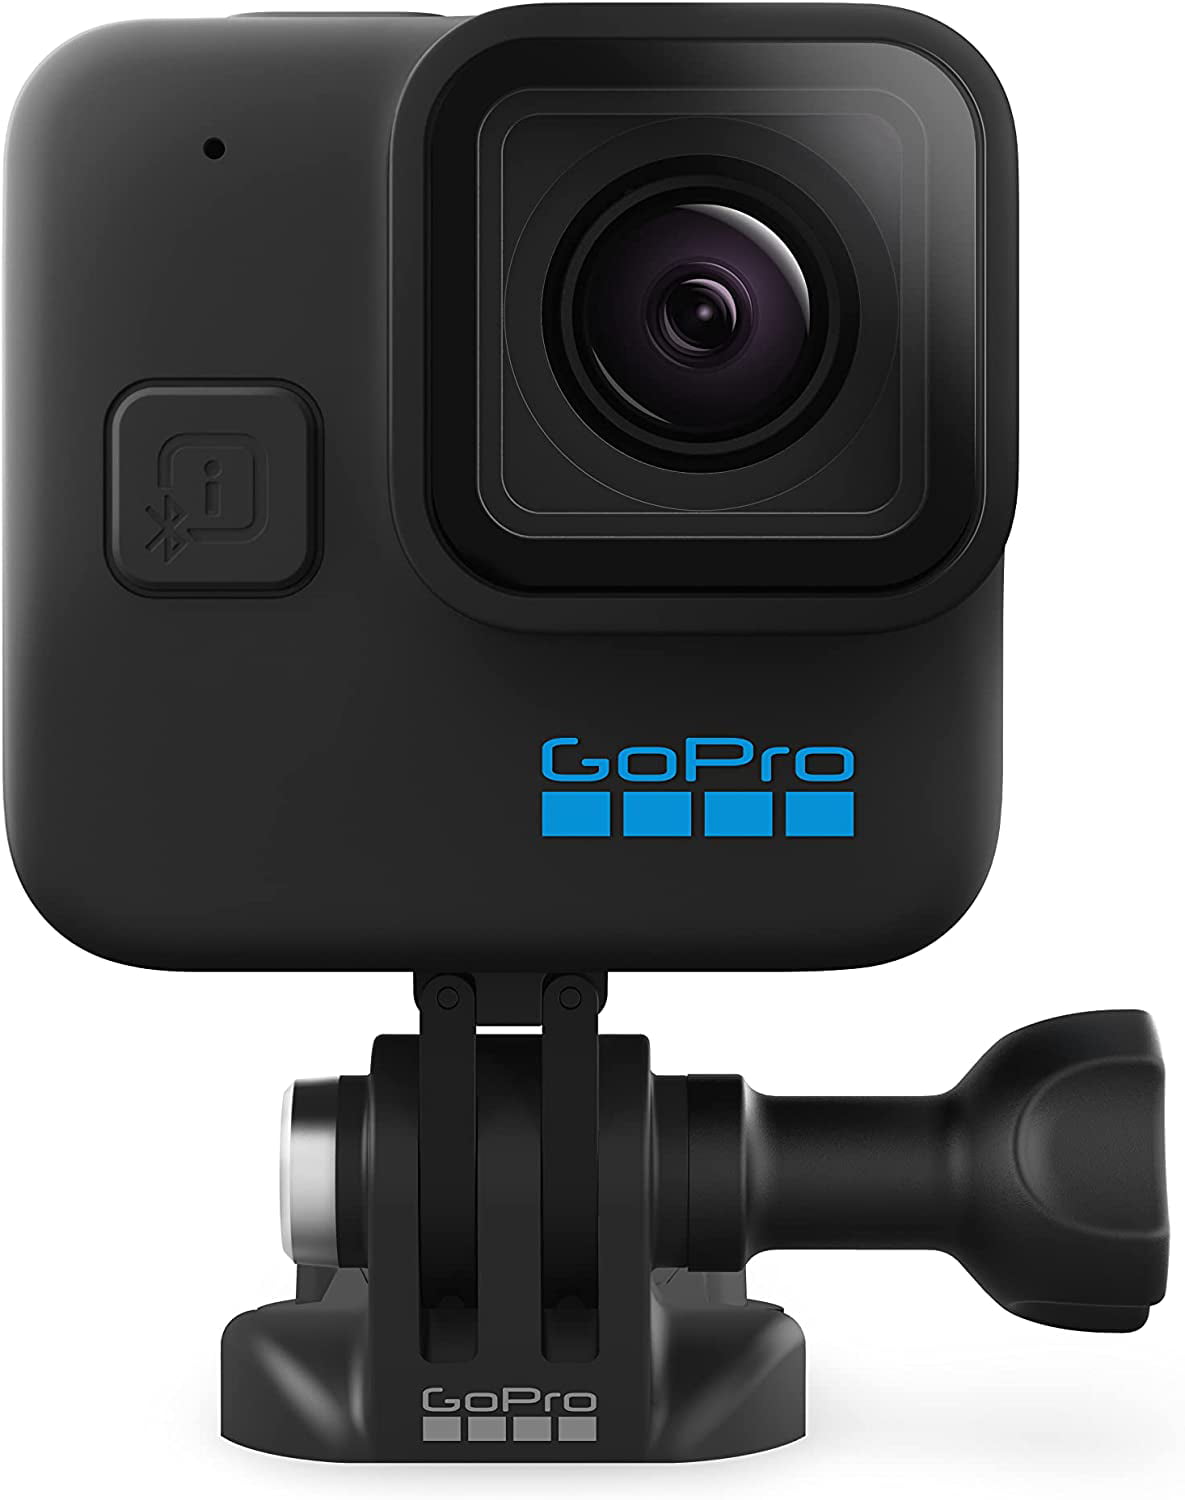 GoPro HERO Black Mini   Compact Waterproof Action Camera with 5.3K  Ultra HD Video, .7MP Frame Grabs, .9" Image Sensor, Live Streaming,